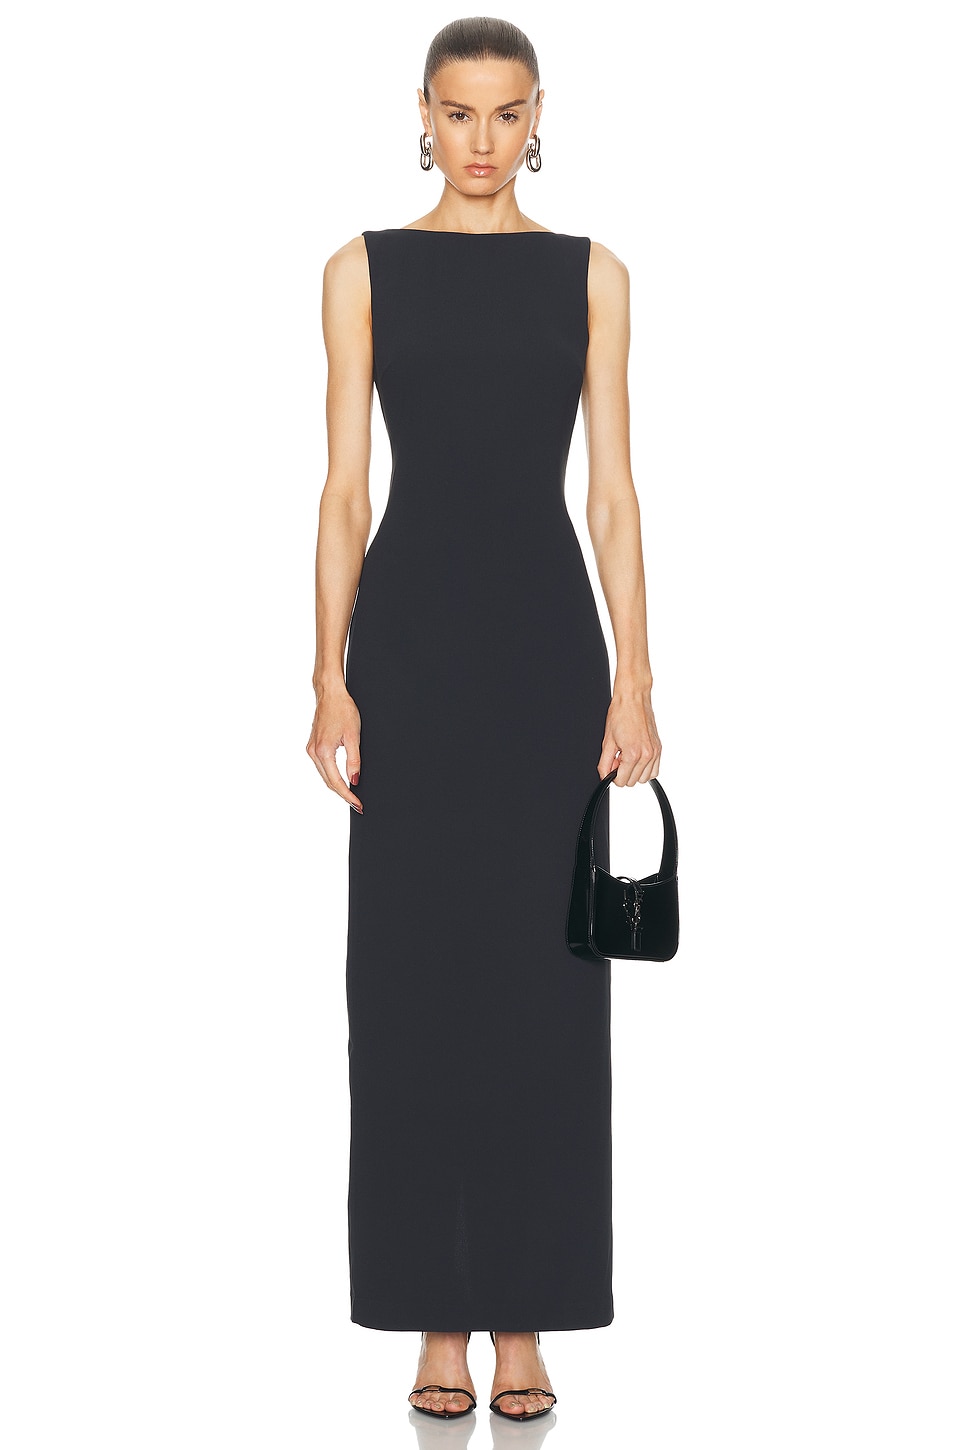 Image 1 of L'Academie by Marianna Giselle Maxi Dress in Black